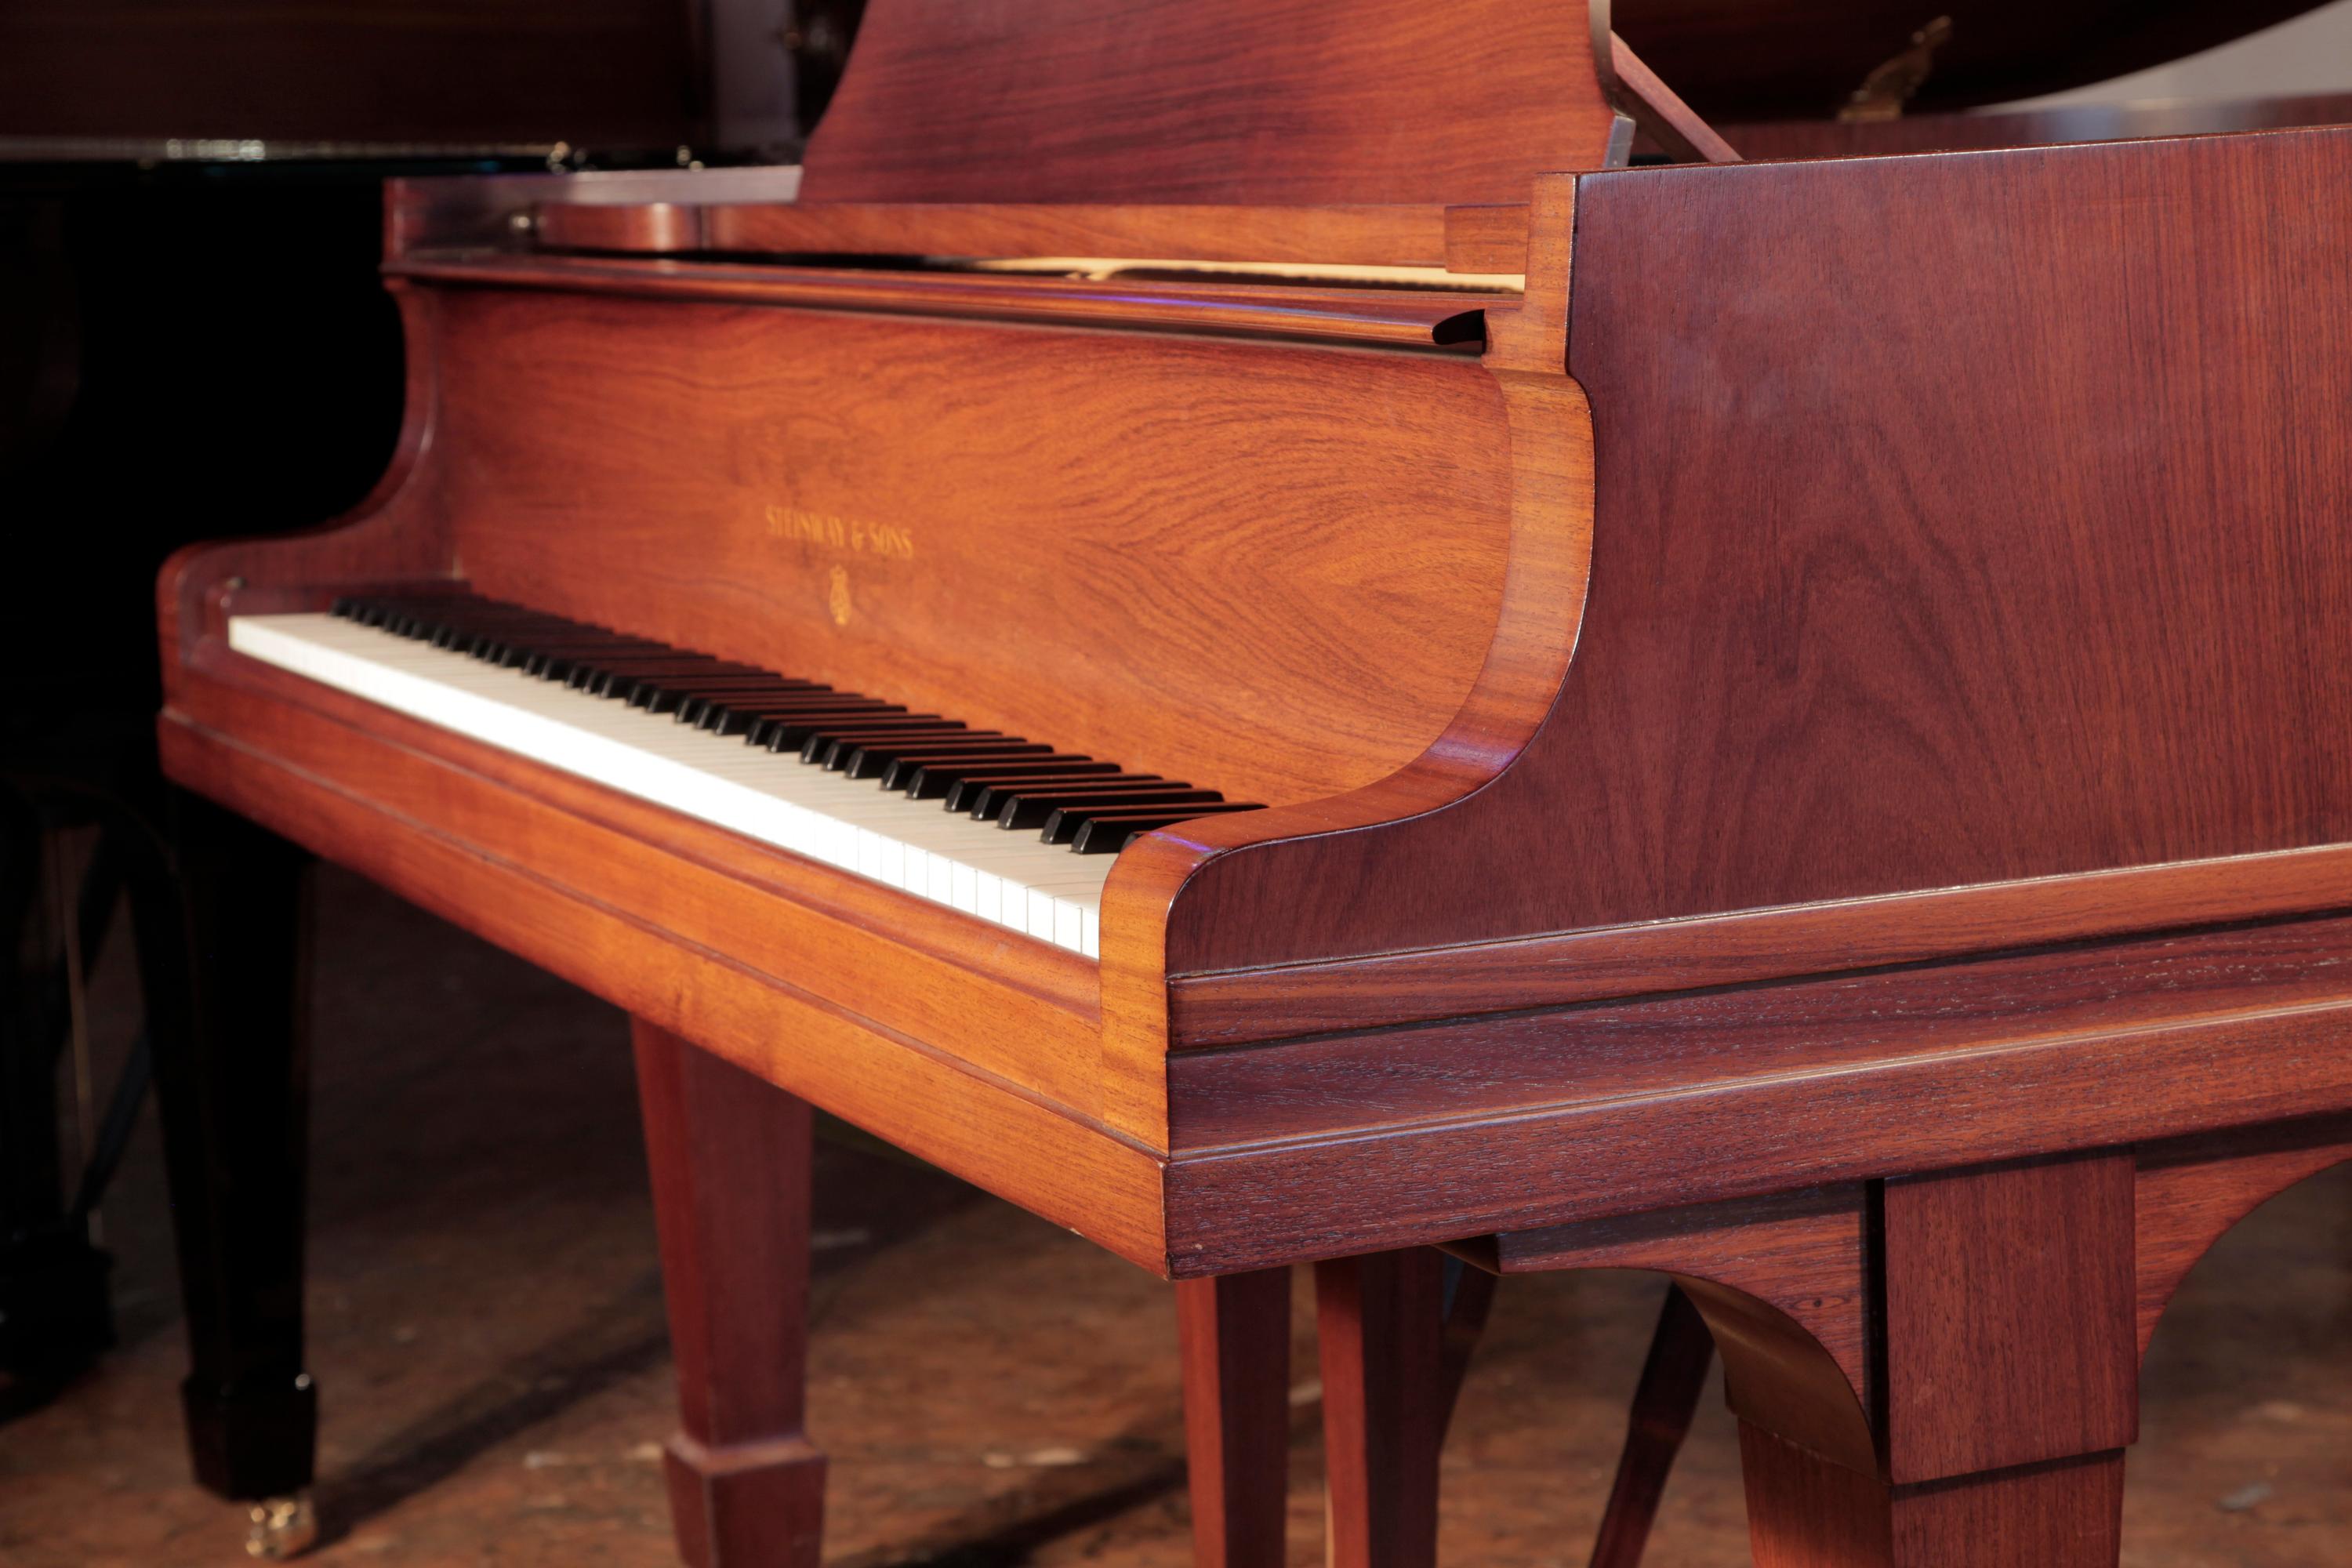 
Rebuilt, 1925, Steinway Model O grand piano for sale with a polished, walnut case and spade legs. Piano has an eighty-eight note keyboard and a two-pedal lyre
The Steinway logo is inlaid in wood on the piano fall. The piano lyre features two square